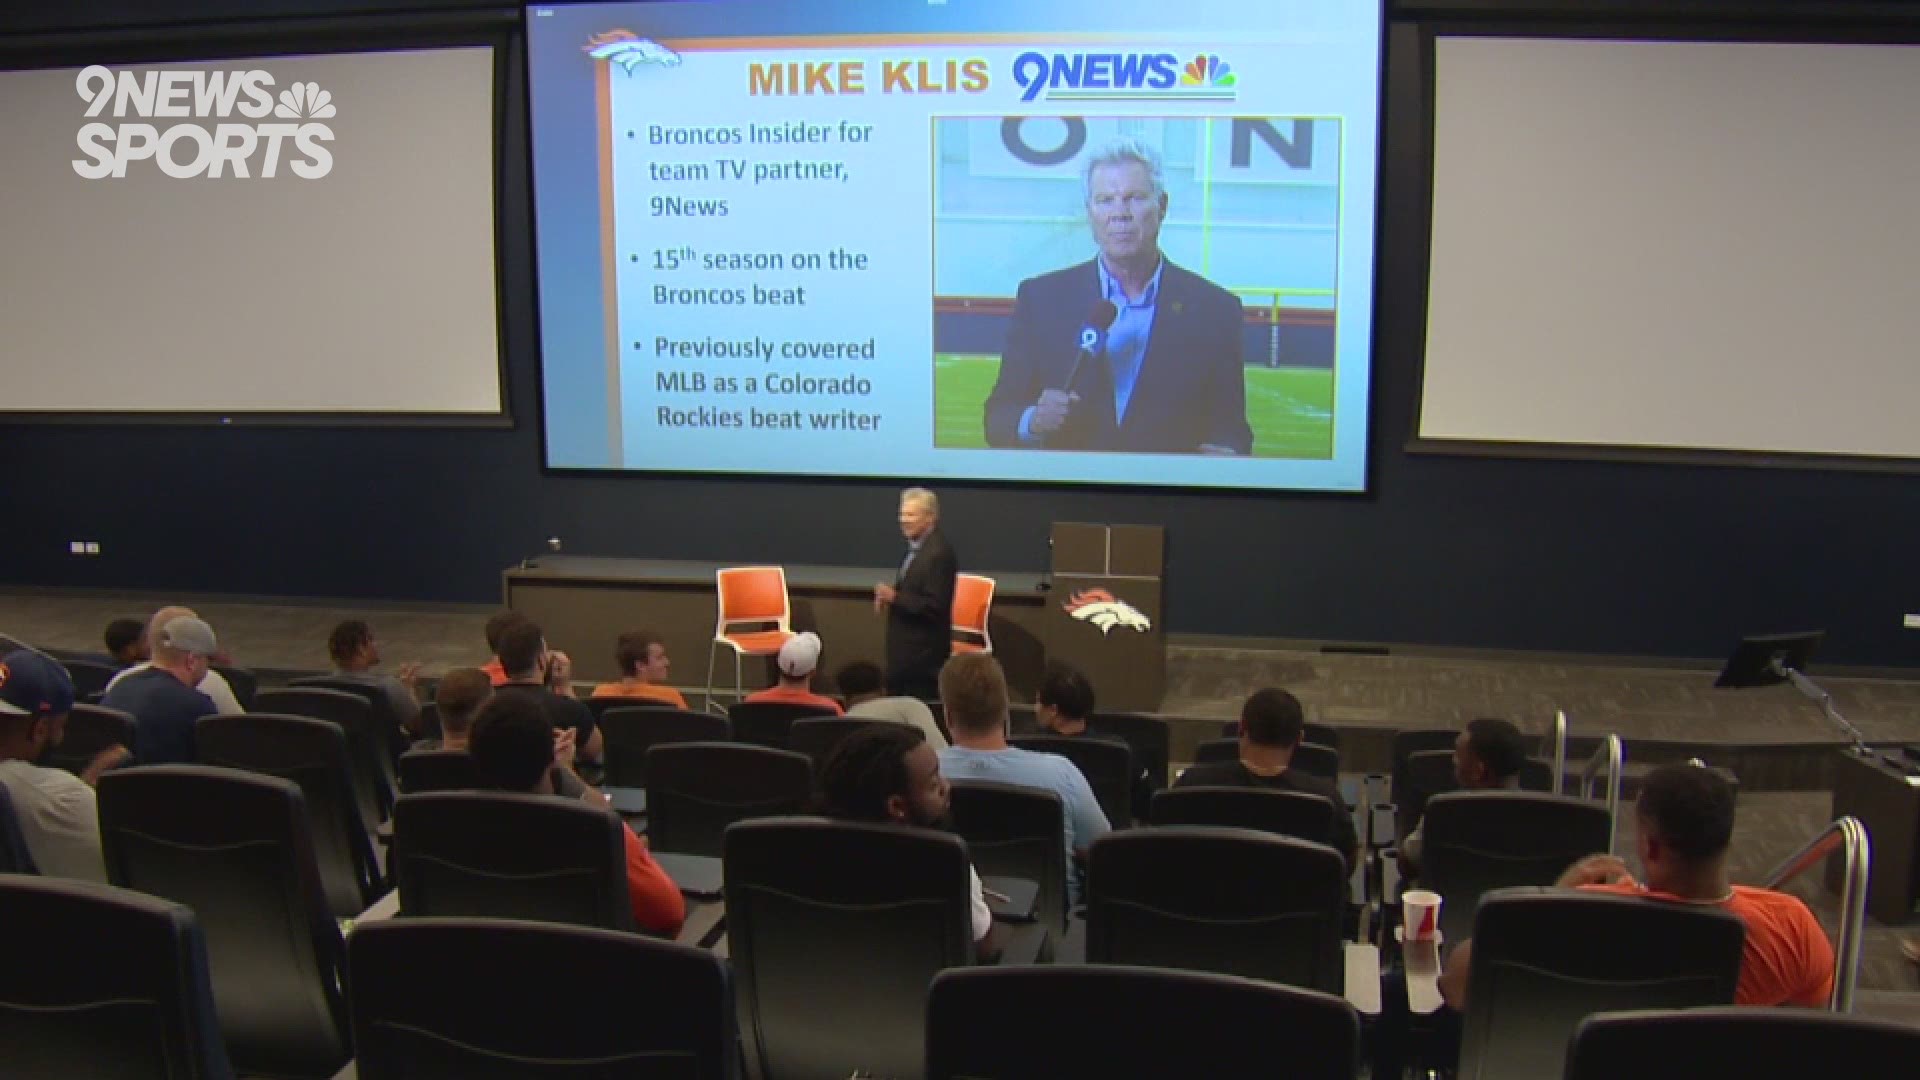 9NEWS' Mike Klis spoke with the Broncos rookies for the fifth consecutive year about their relationship with the media.